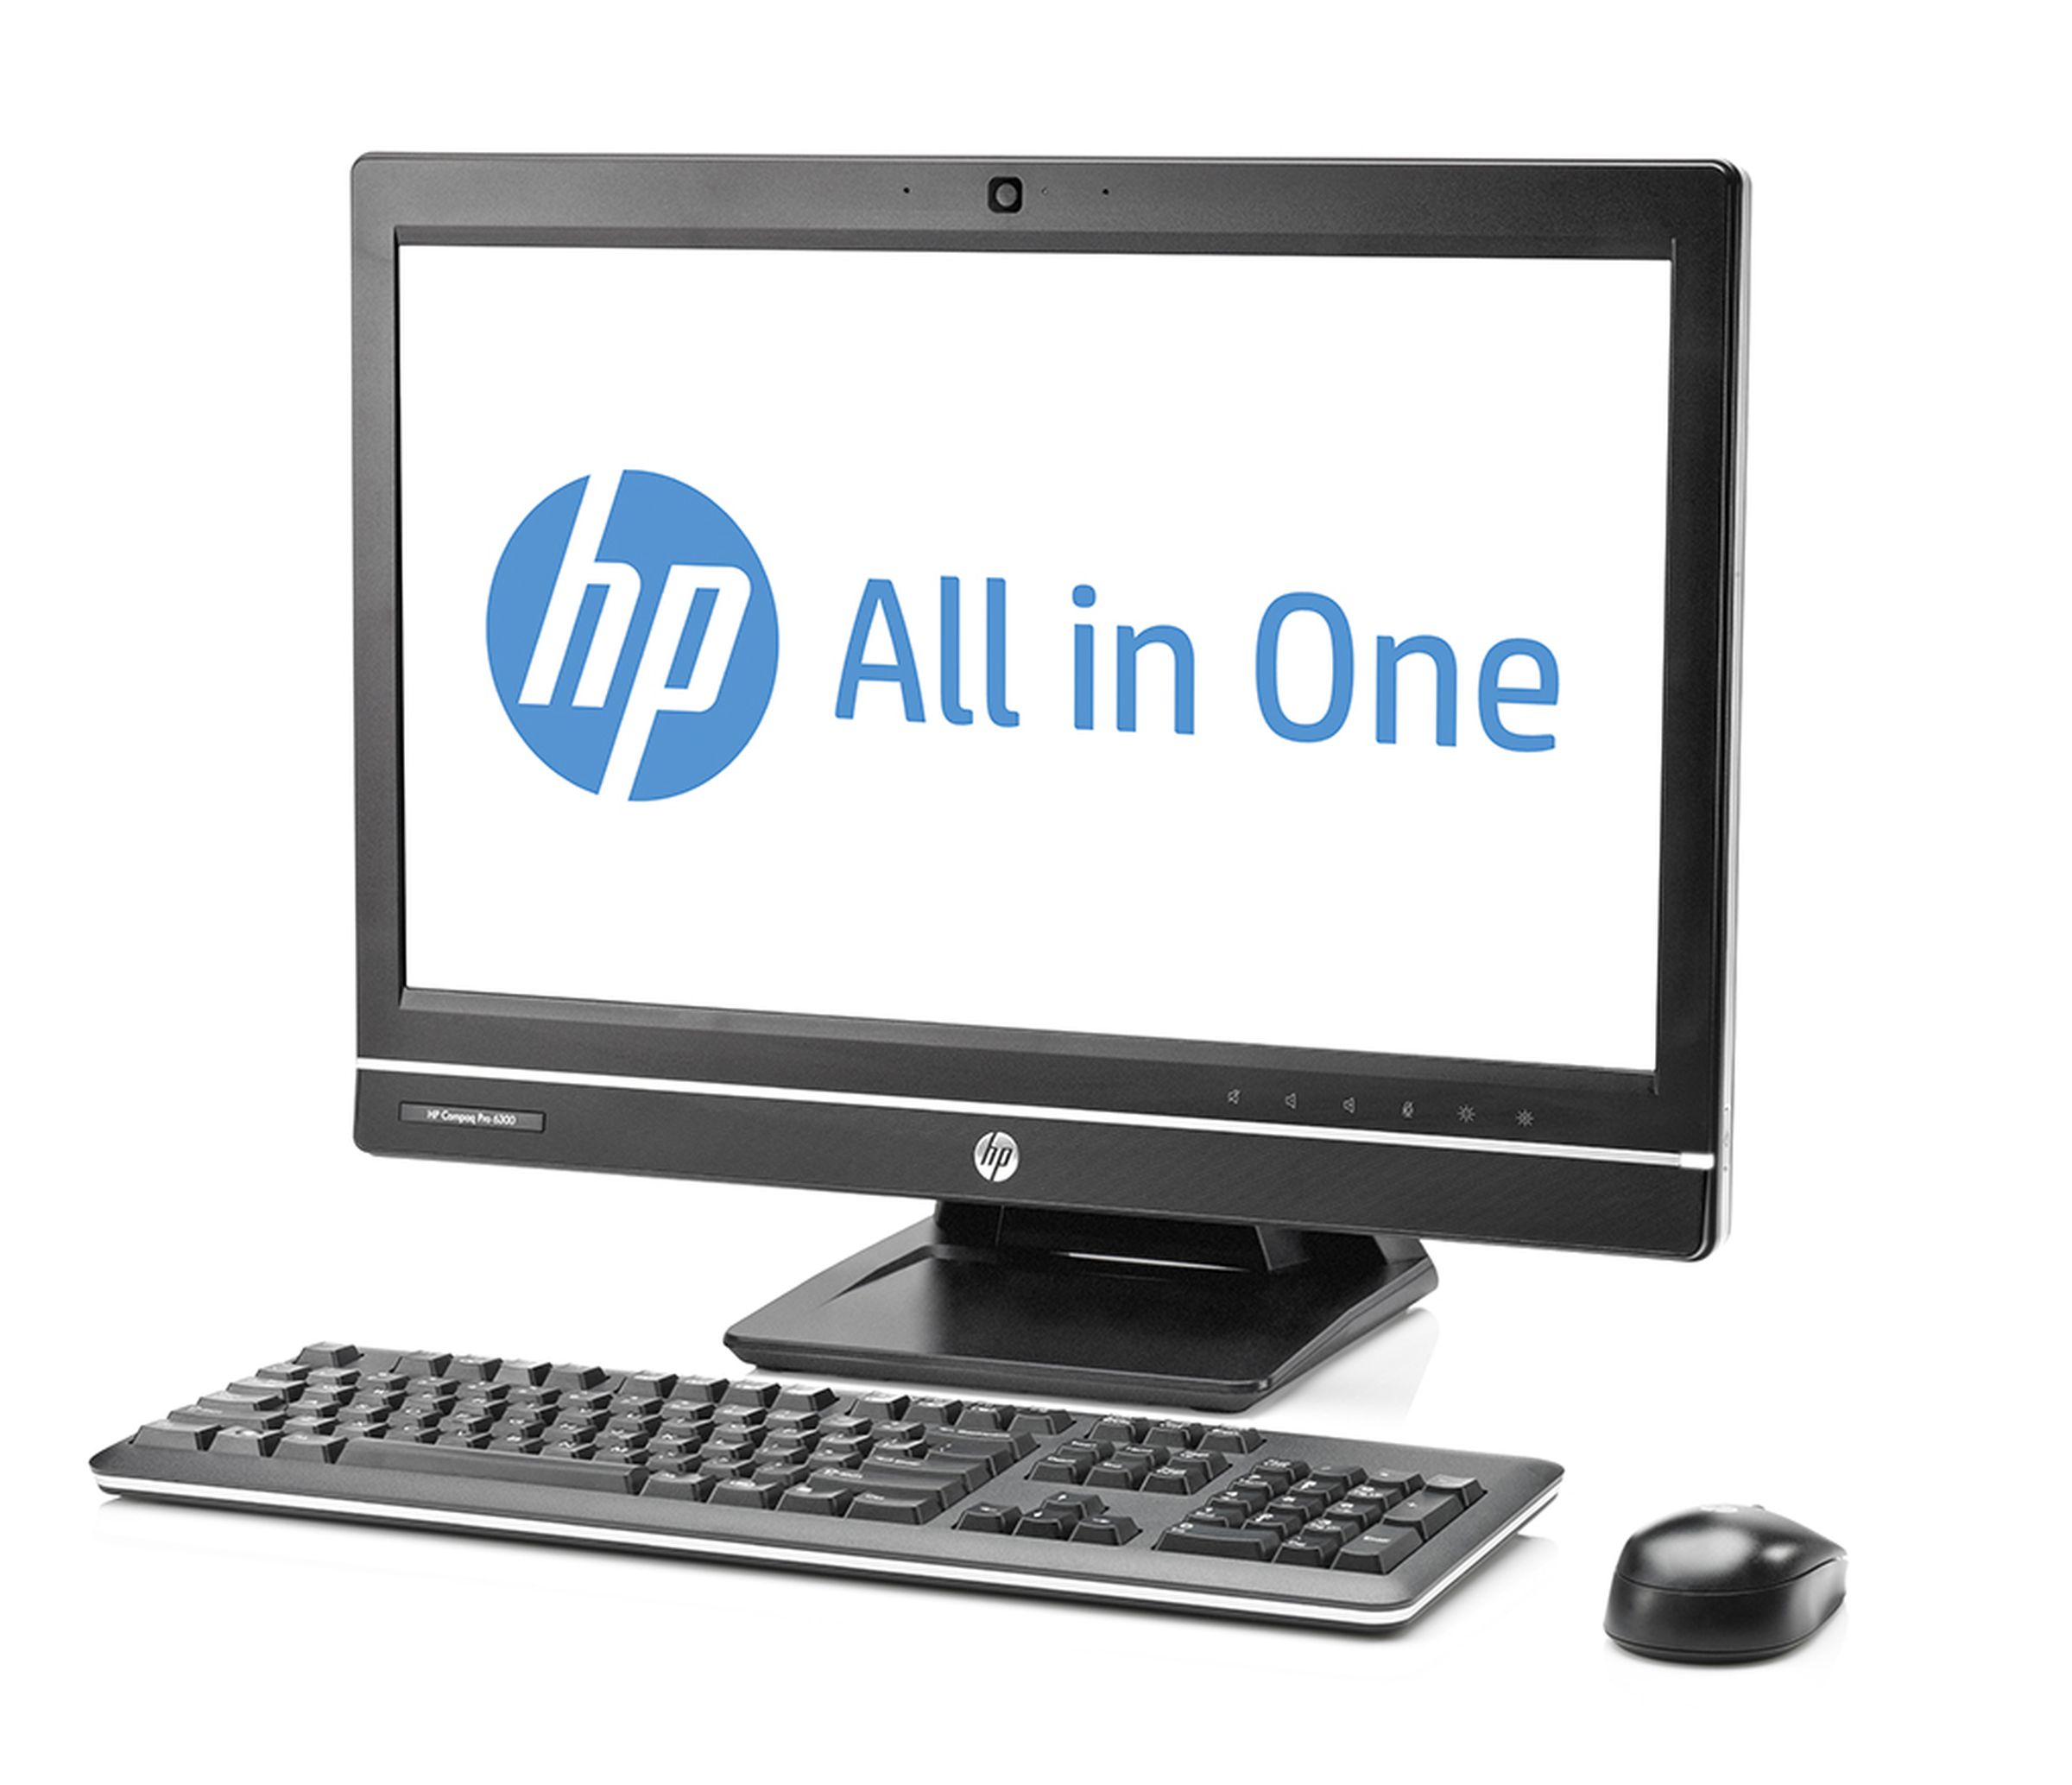 HP Compaq Elite 8300, Pro 6300, and Pro 4300 all-in-one press pictures